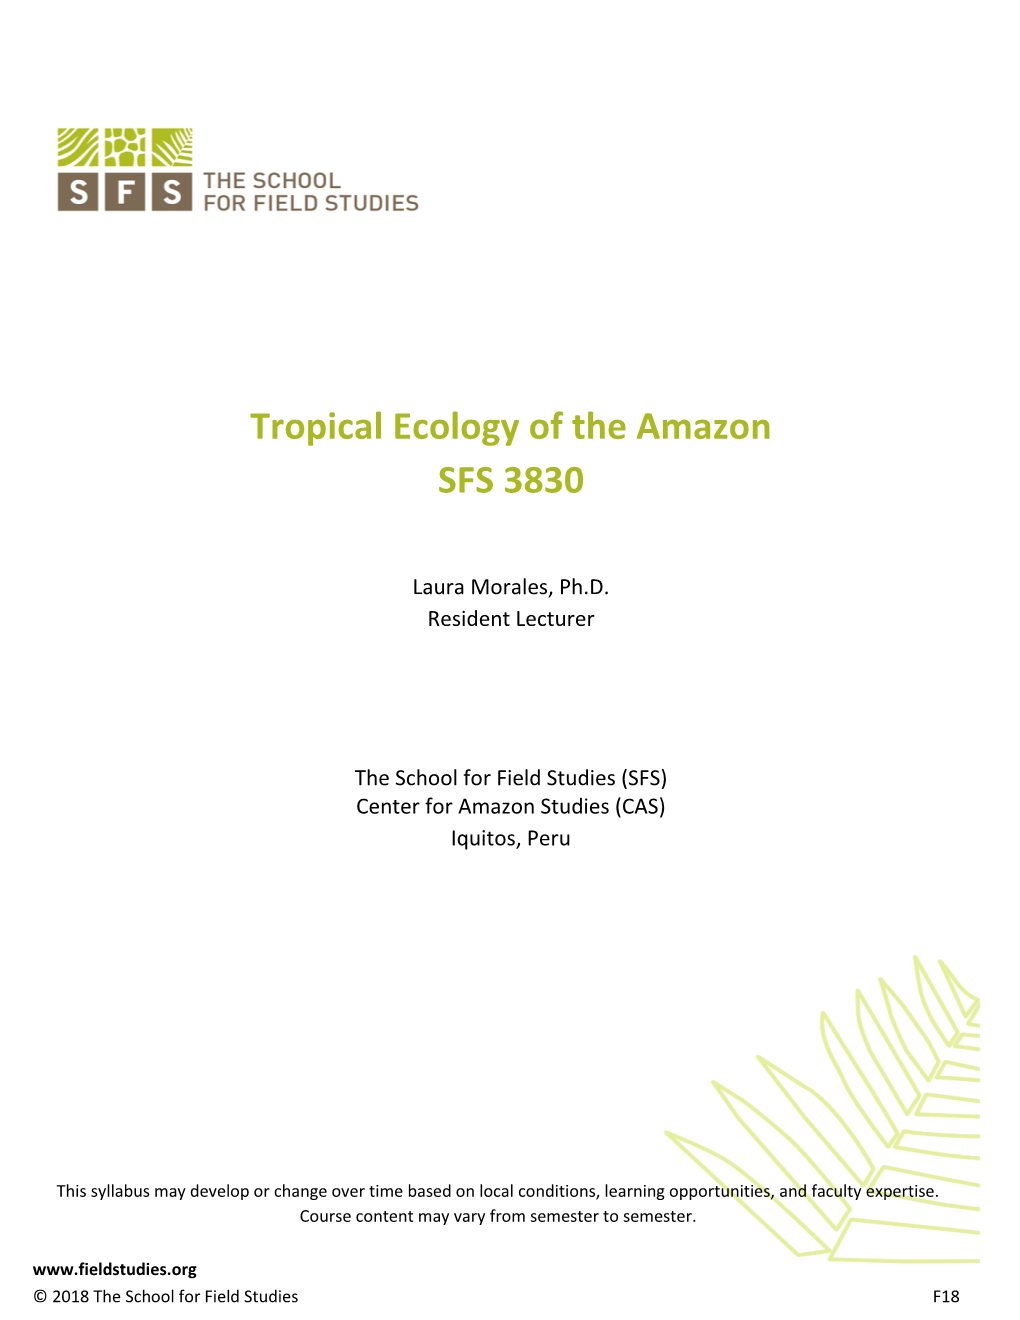 Tropical Ecology of the Amazon SFS 3830